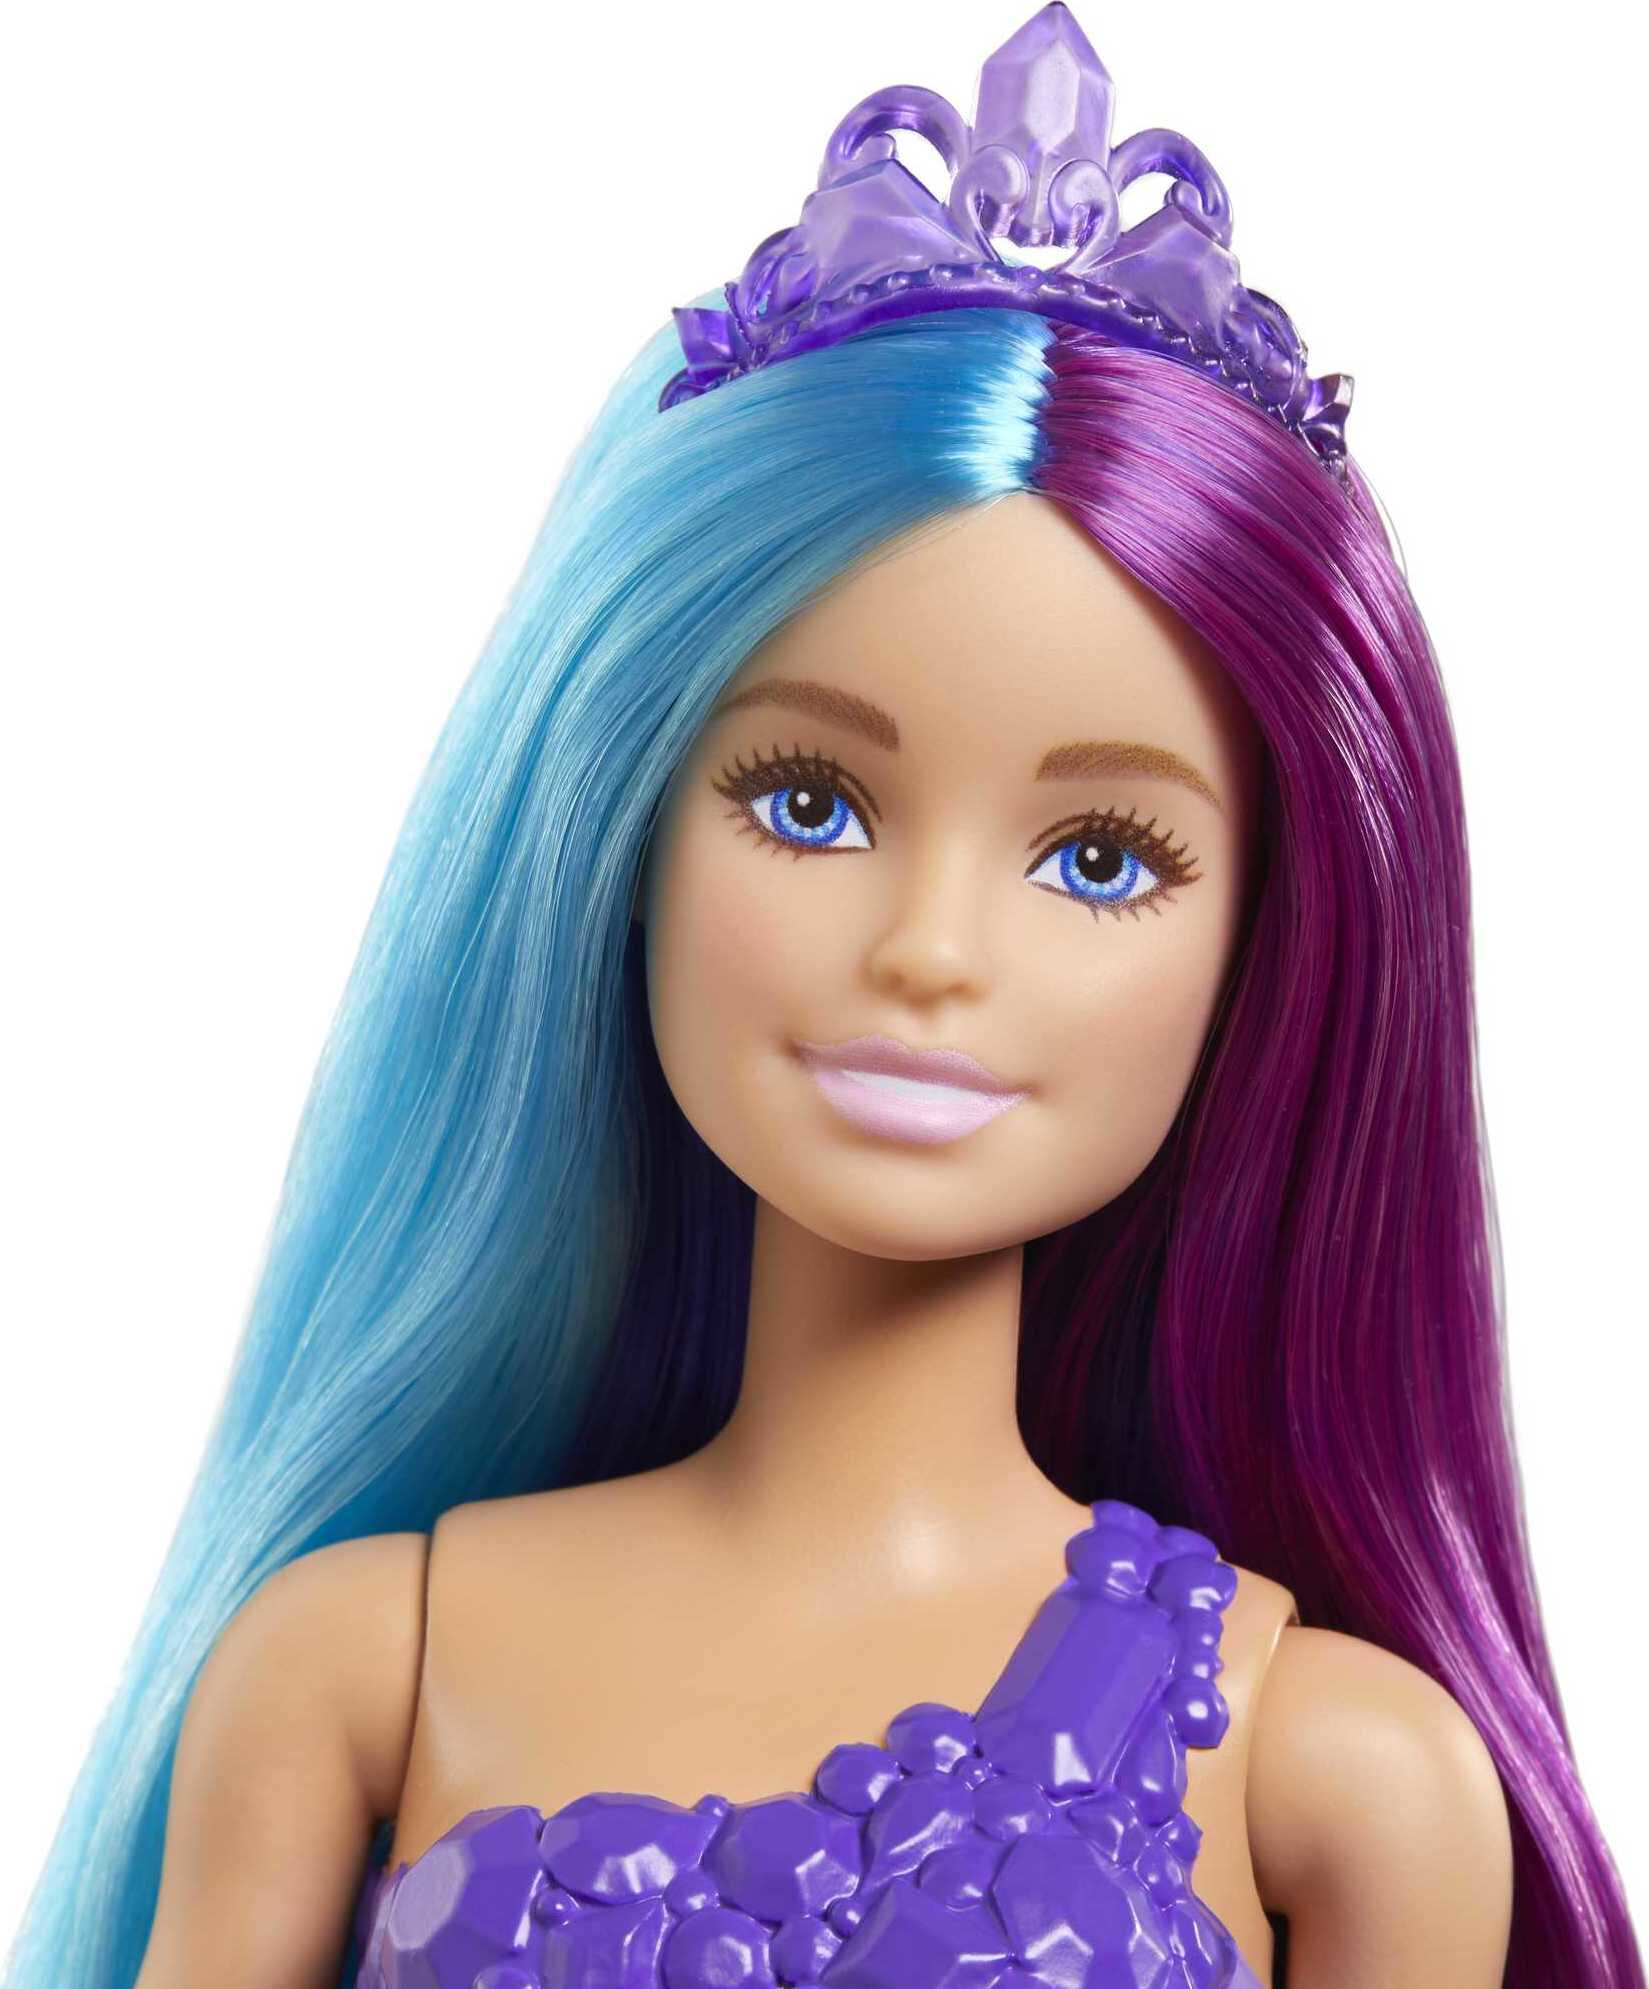 Barbie Dreamtopia Mermaid Doll with Extra-Long Fantasy Hair and Styling Accessories - image 3 of 6